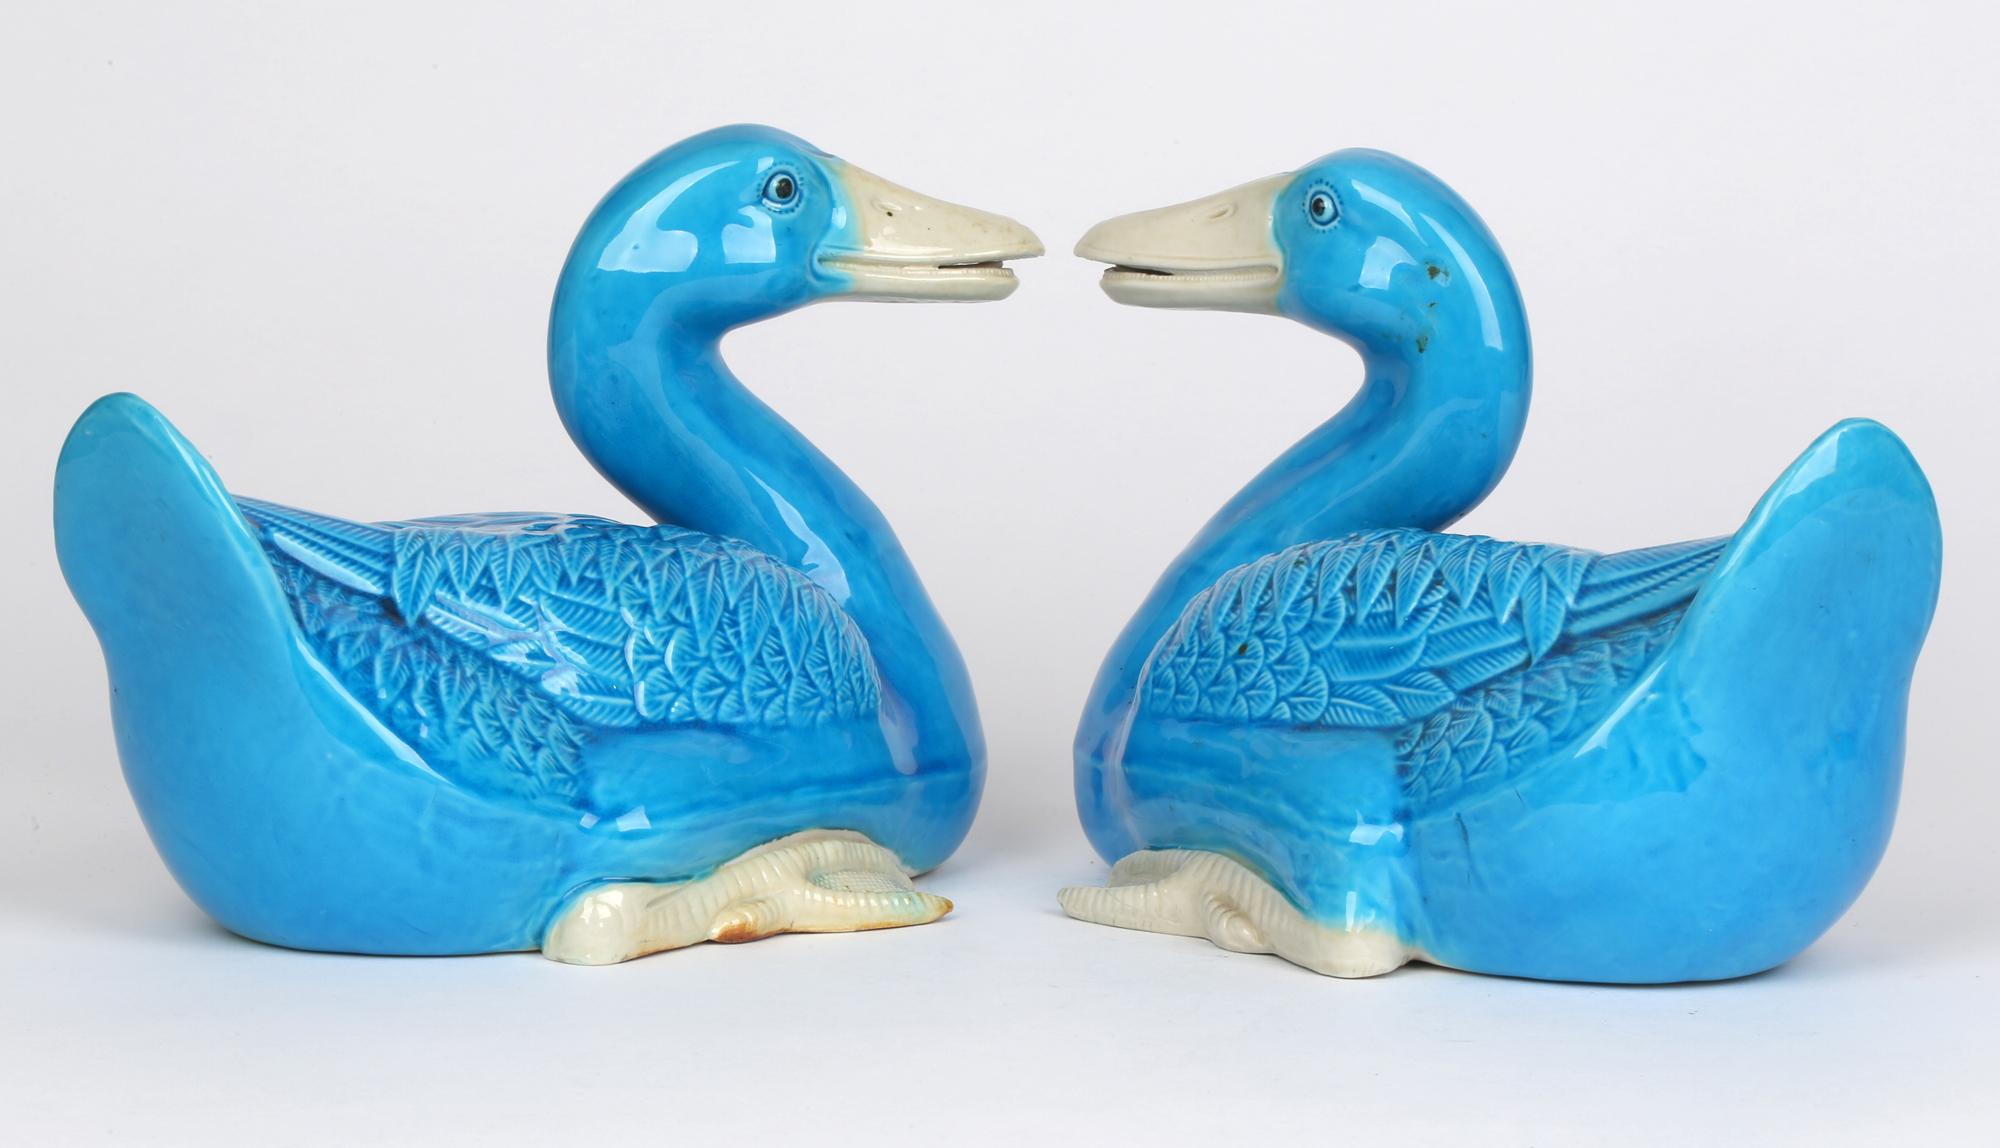 A very stylish and finely made Chinese pair porcelain turquoise glazed duck figures dating from the early to mid 20th century. The ducks are portrayed in a resting or swimming position with their heads held up and their feet gathered in at their